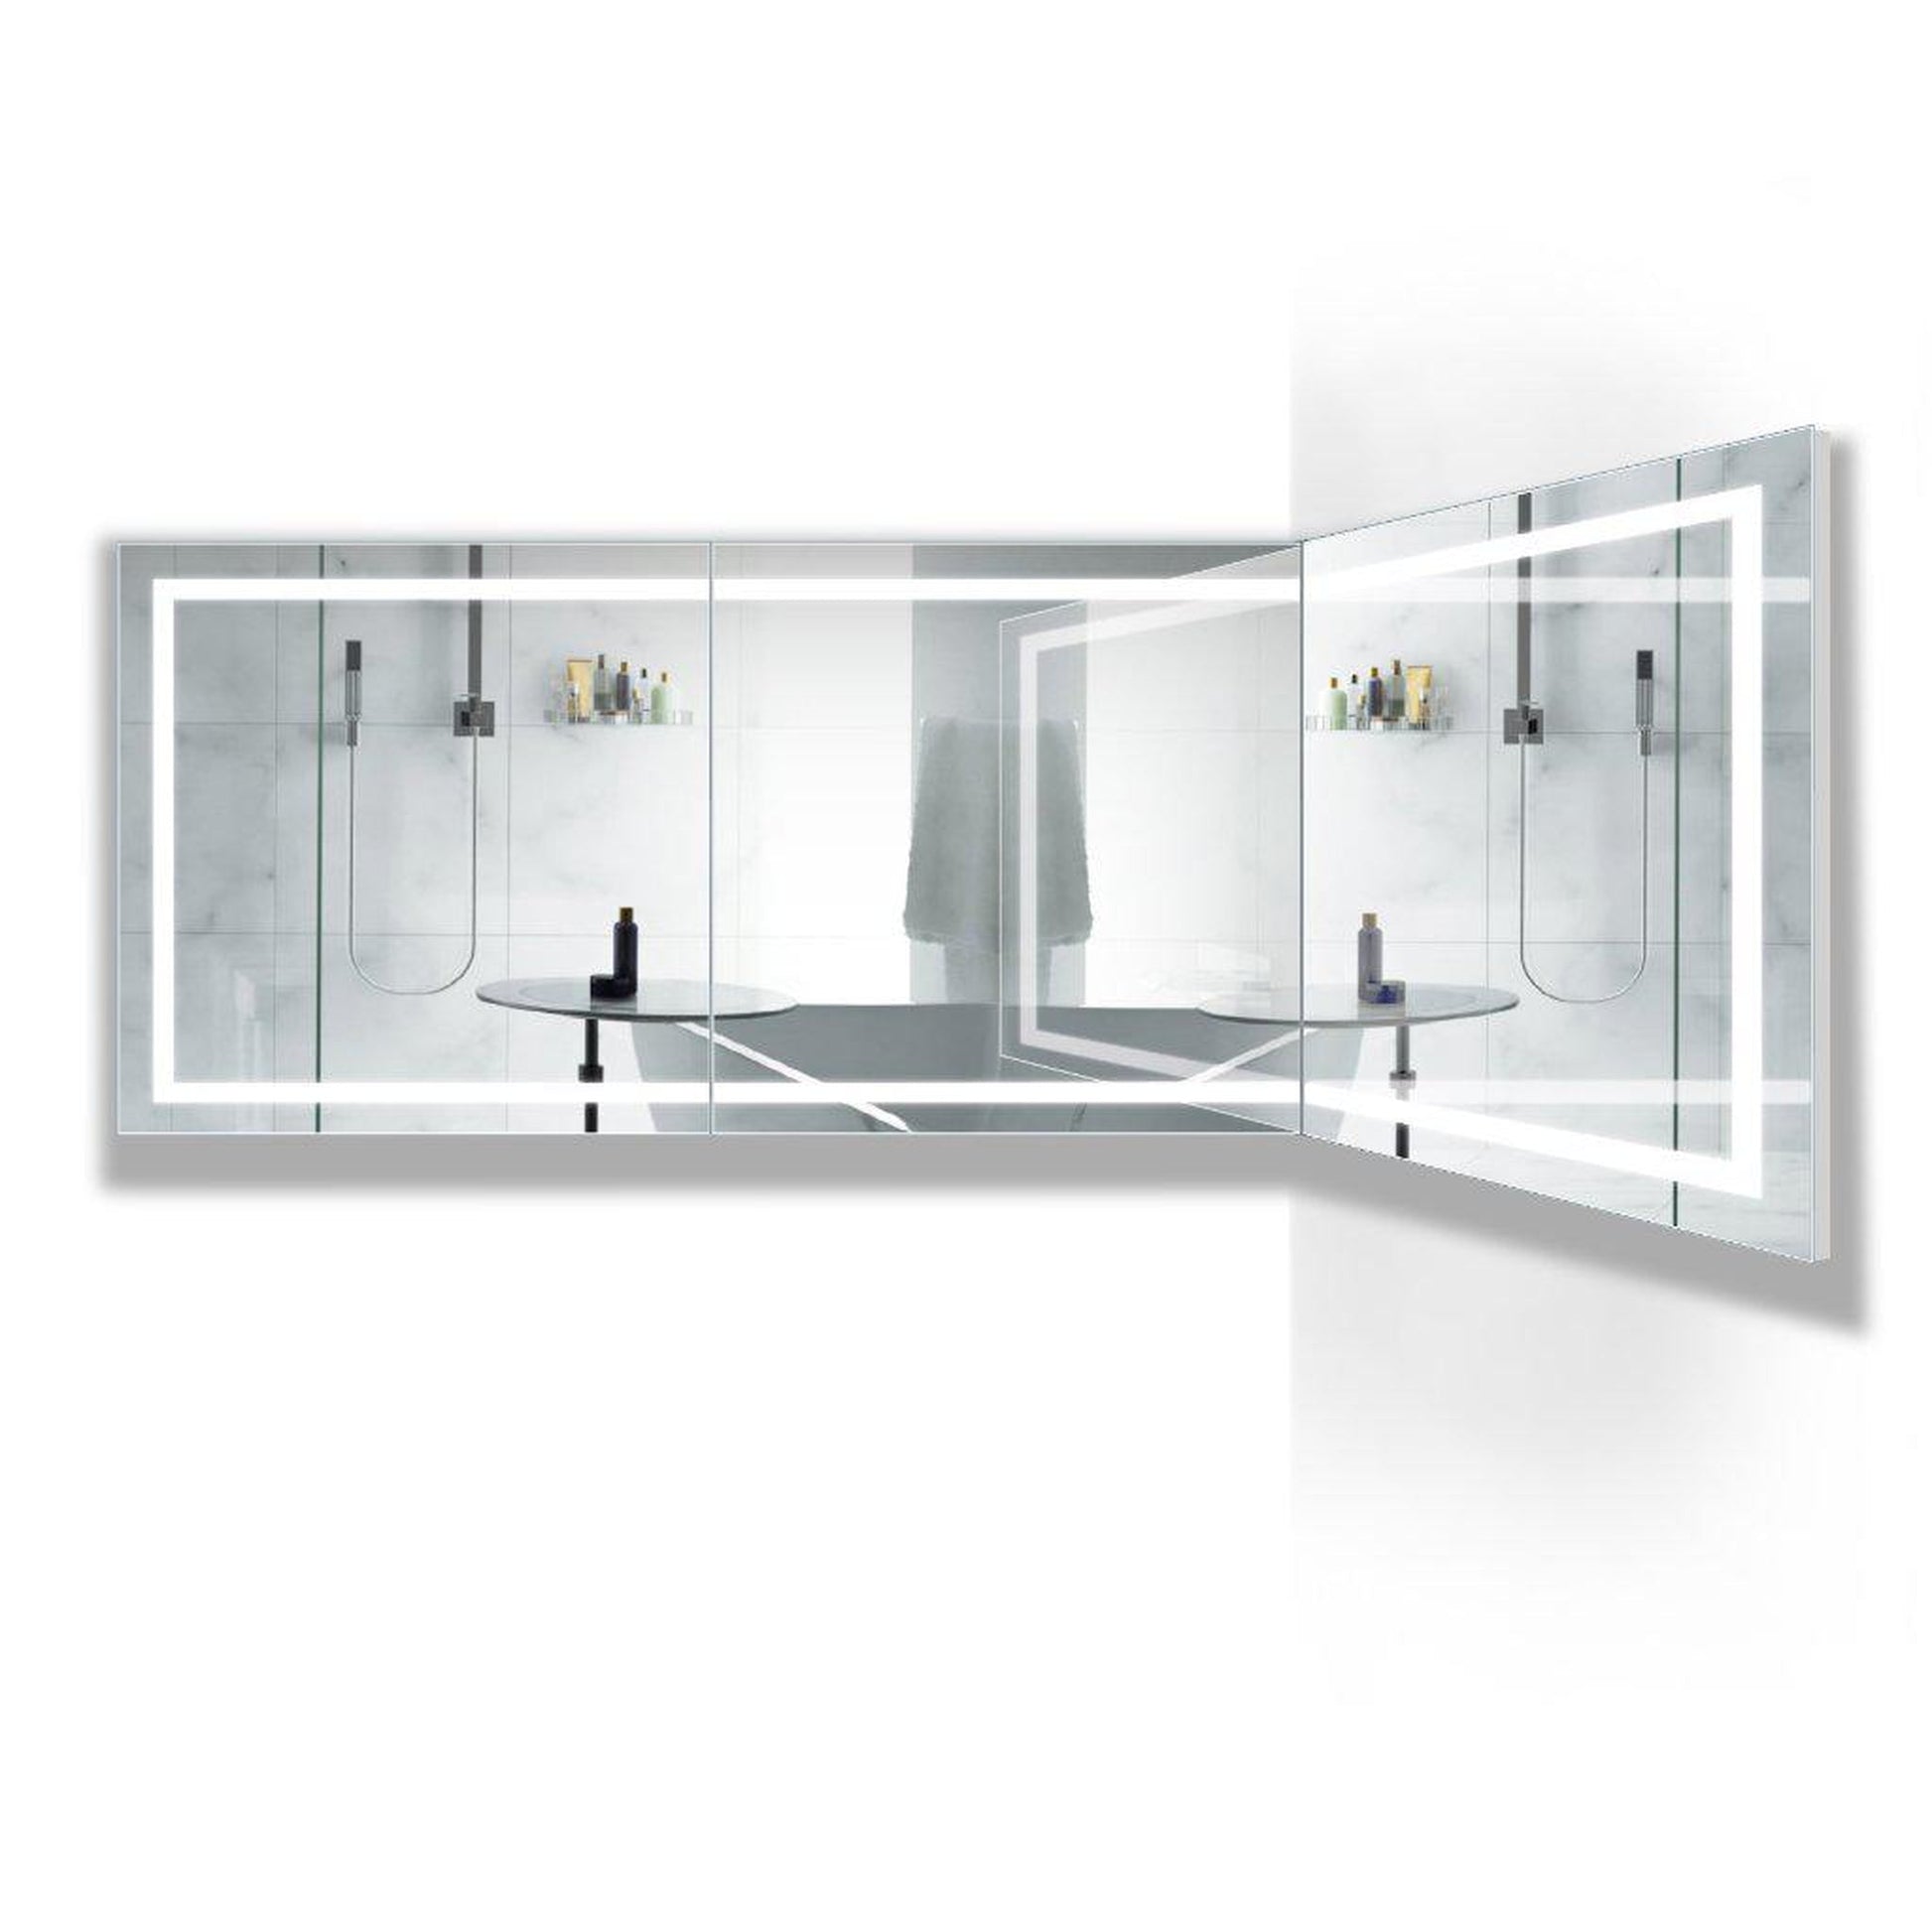 Krugg Reflections Mod 108" x 36" 5000K Long Modular Corner Wall-Mounted Silver-Backed LED Bathroom Vanity Mirror With Built-in Defogger and Dimmer